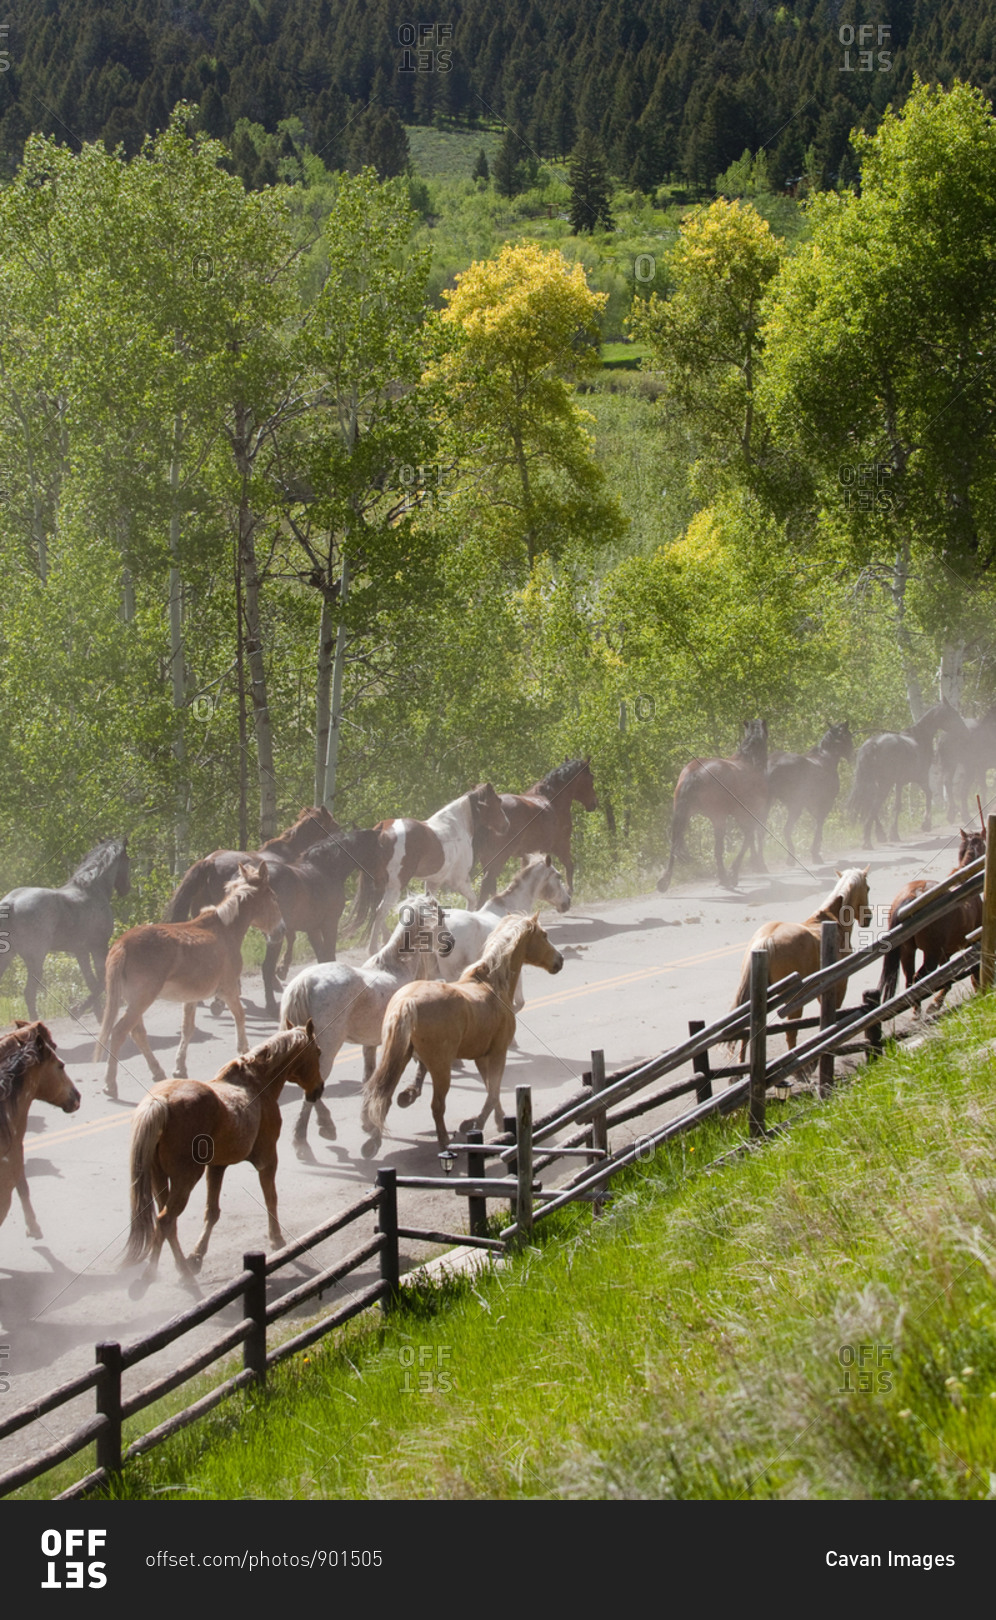 A team of horses and donkeys run down a road in the countryside